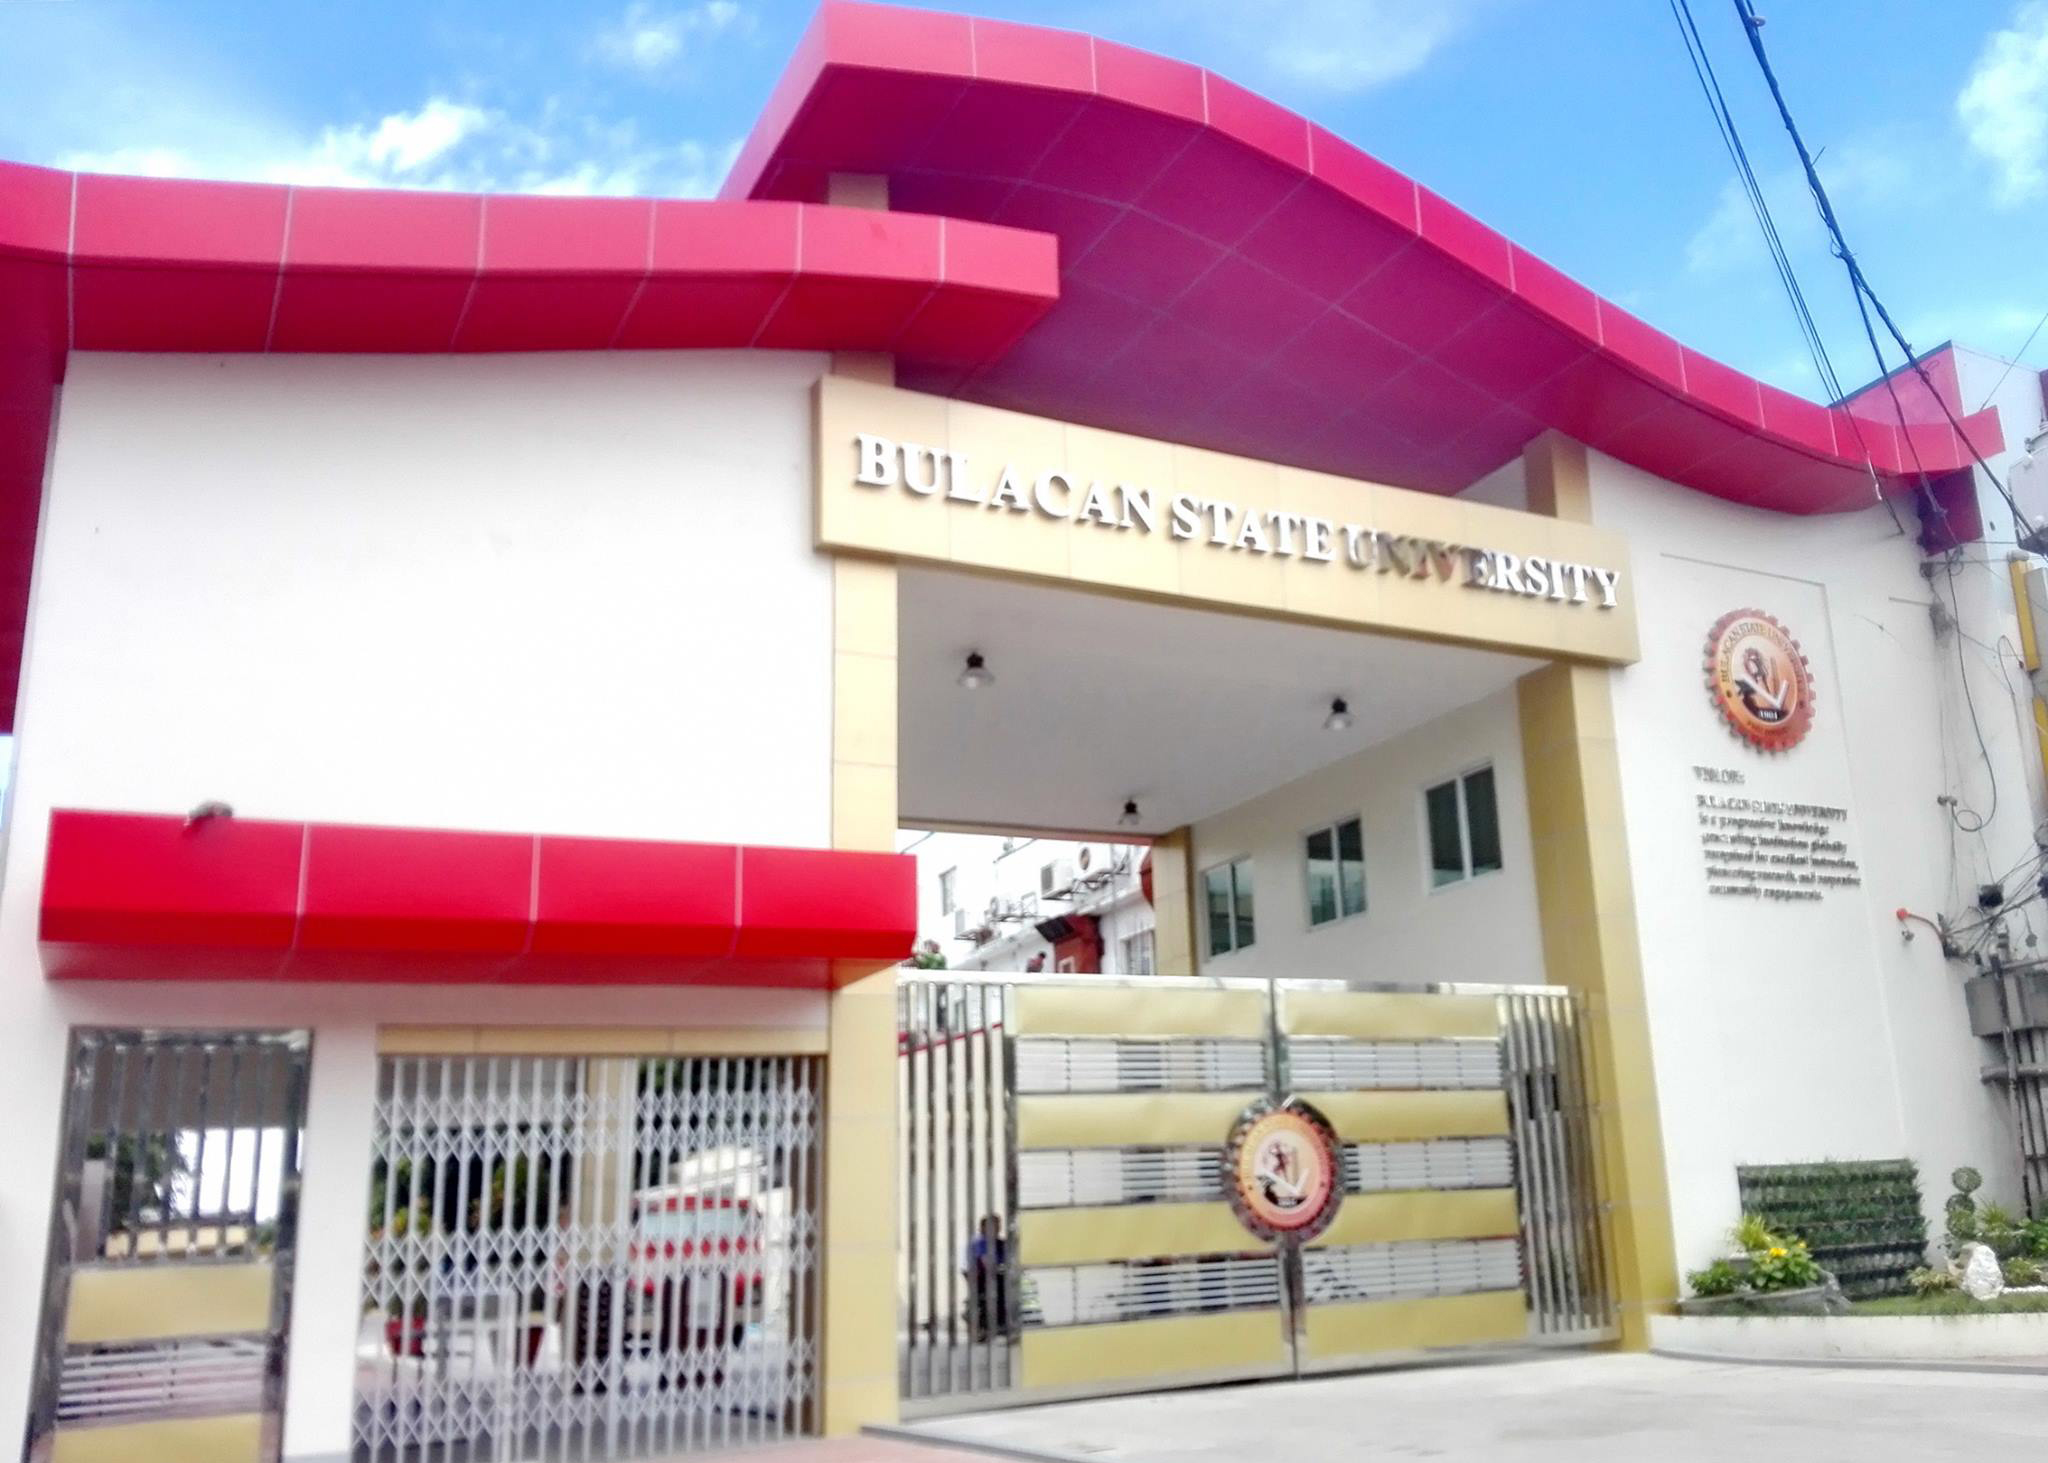 Construction work at Bulacan State University suspended following magnitude 7 quake